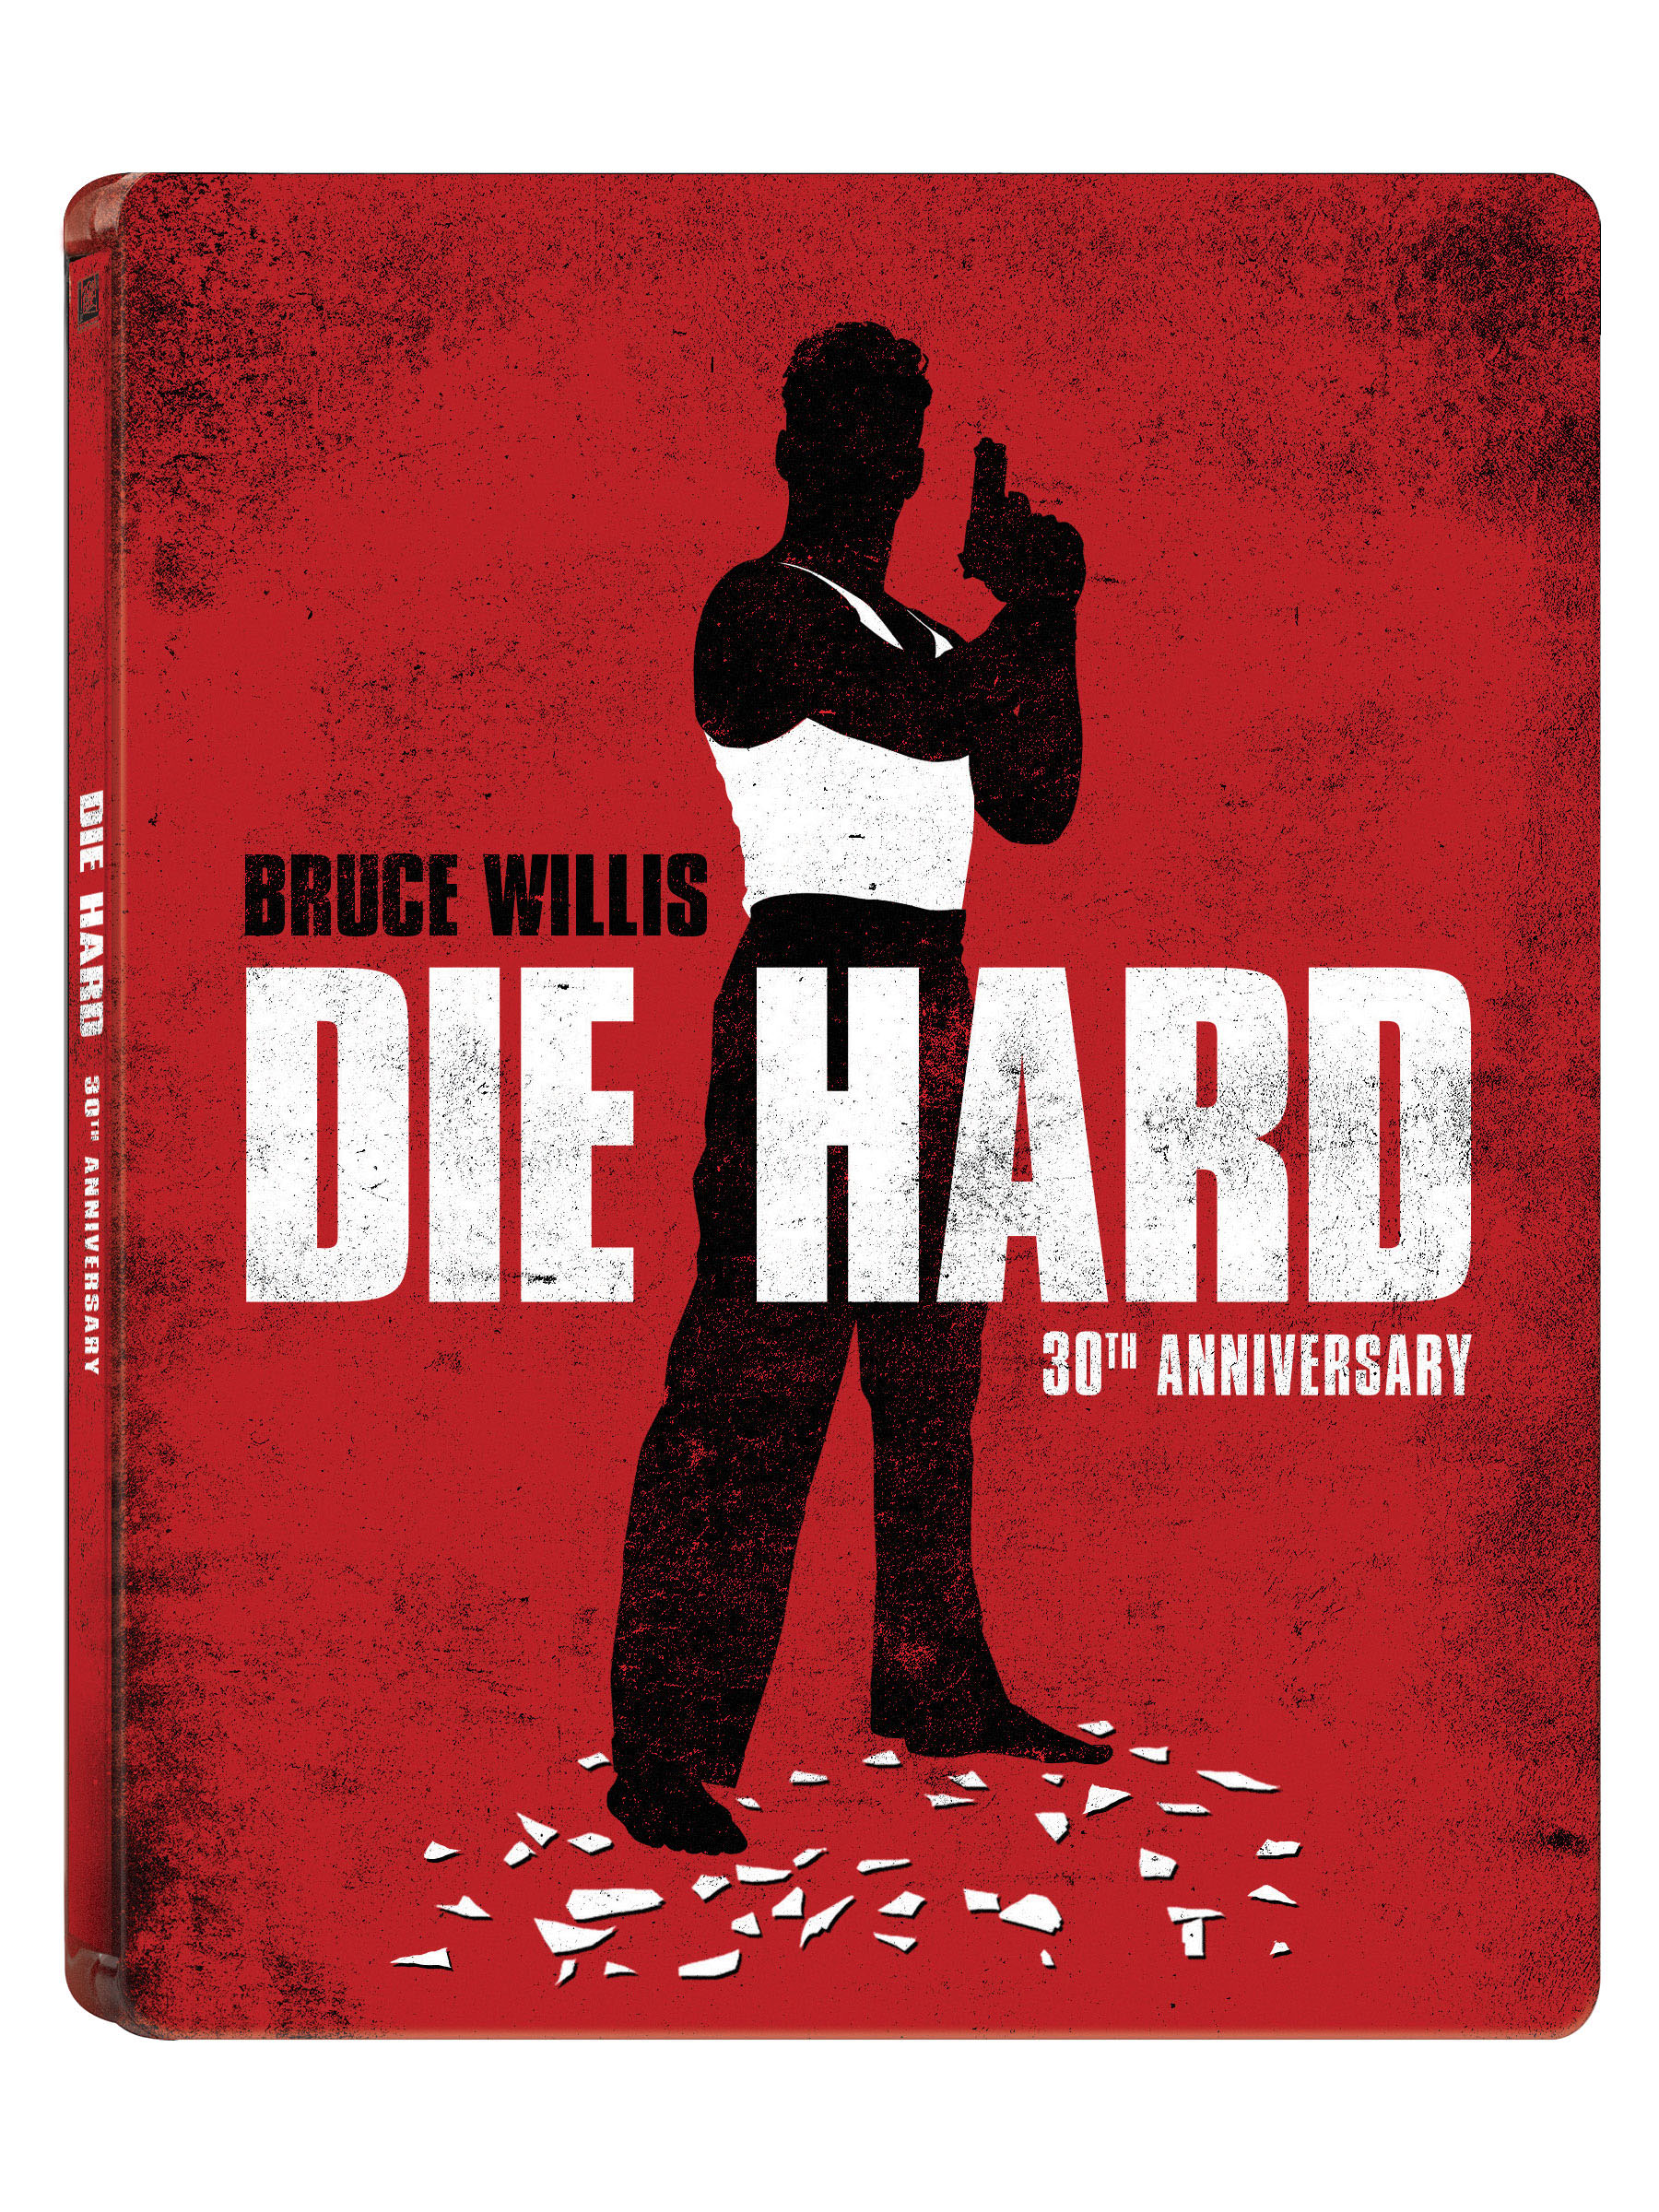 Die Hard 30th Anniversary Steel Book Combo cover (20th Century Fox Home Entertainment)